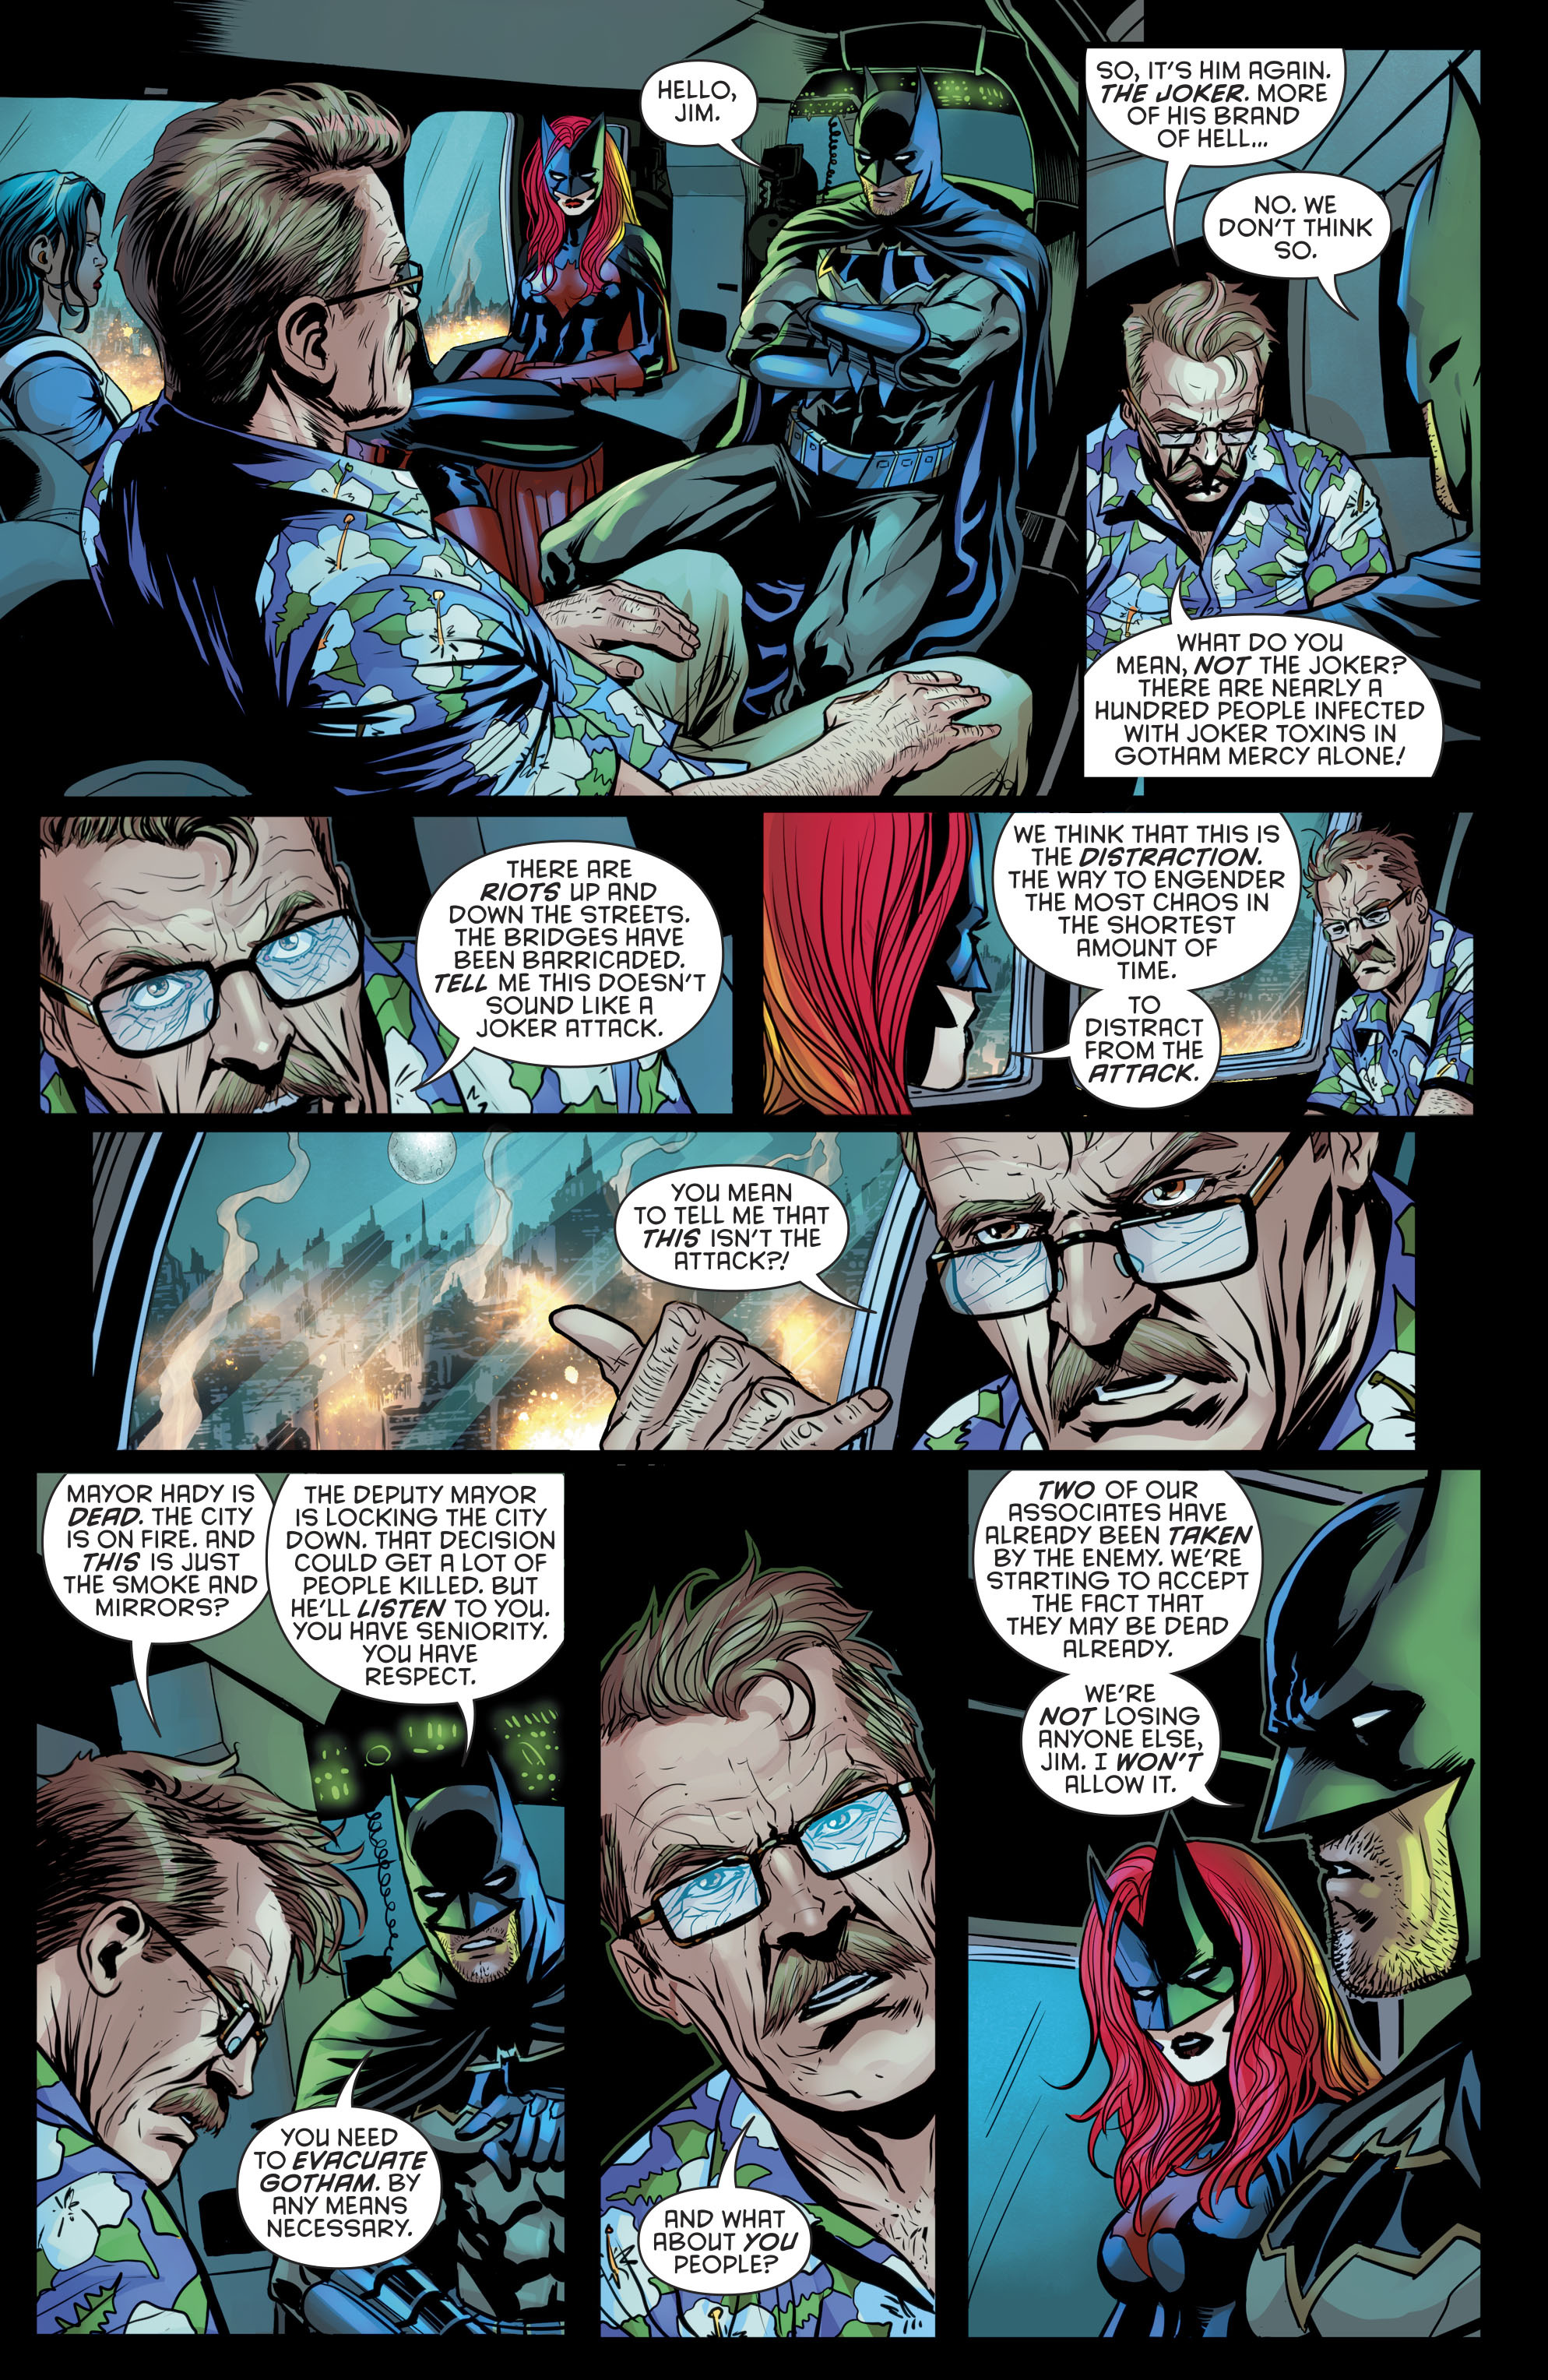 Detective Comics (2016-): Chapter 953 - Page 5